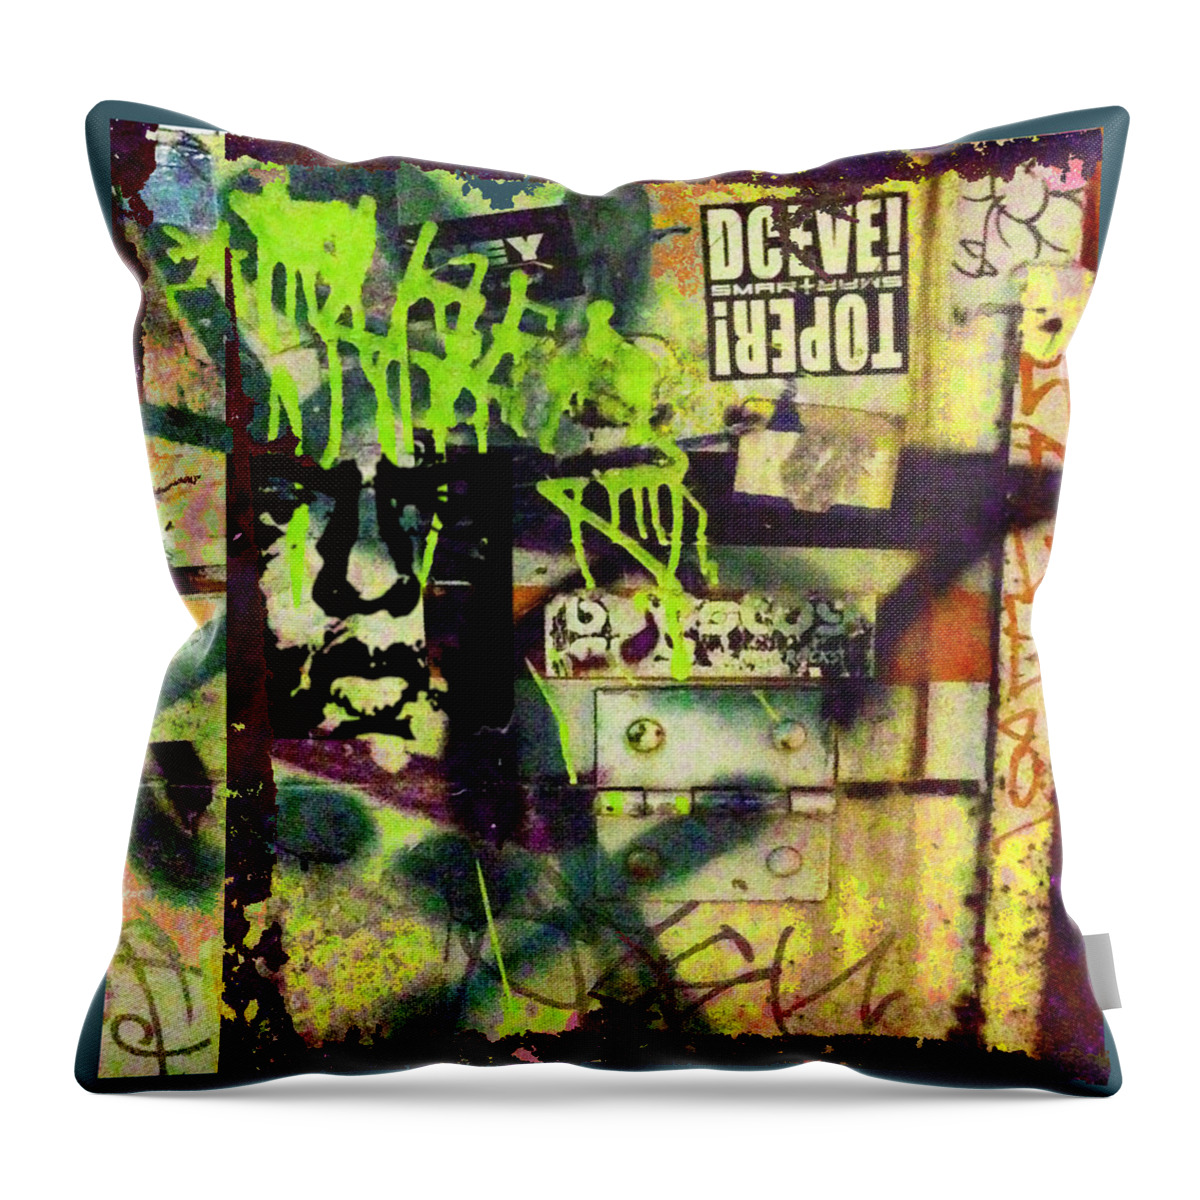 Abstract Throw Pillow featuring the painting Urban Graffiti Abstract 5 by Tony Rubino